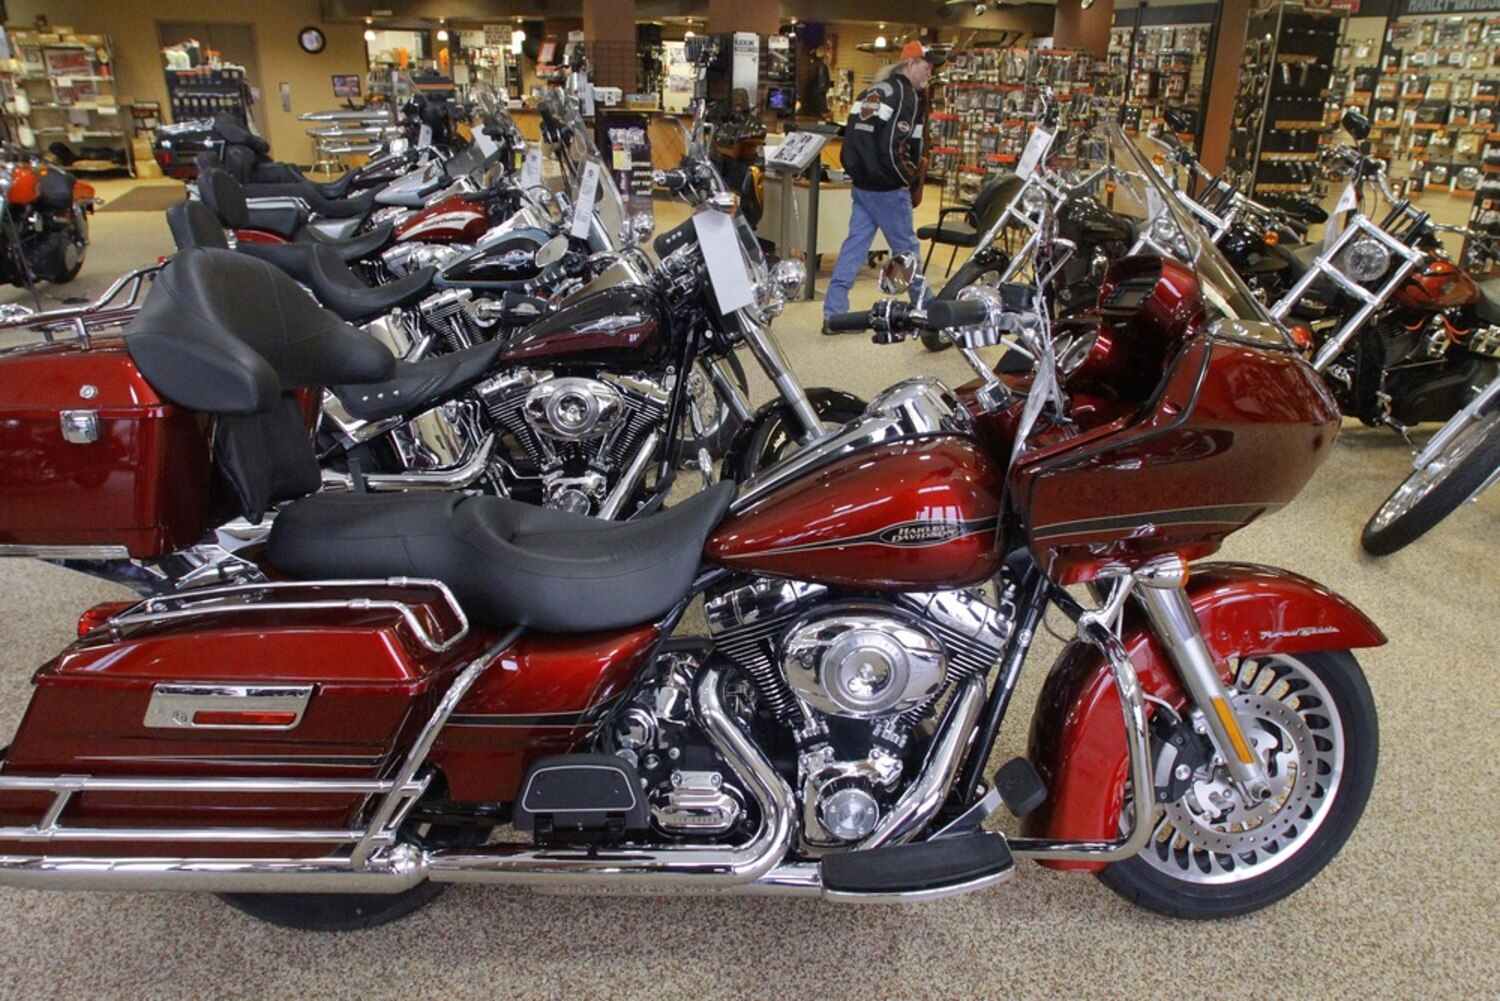 Motorcycles displayed in a motor shop in the US